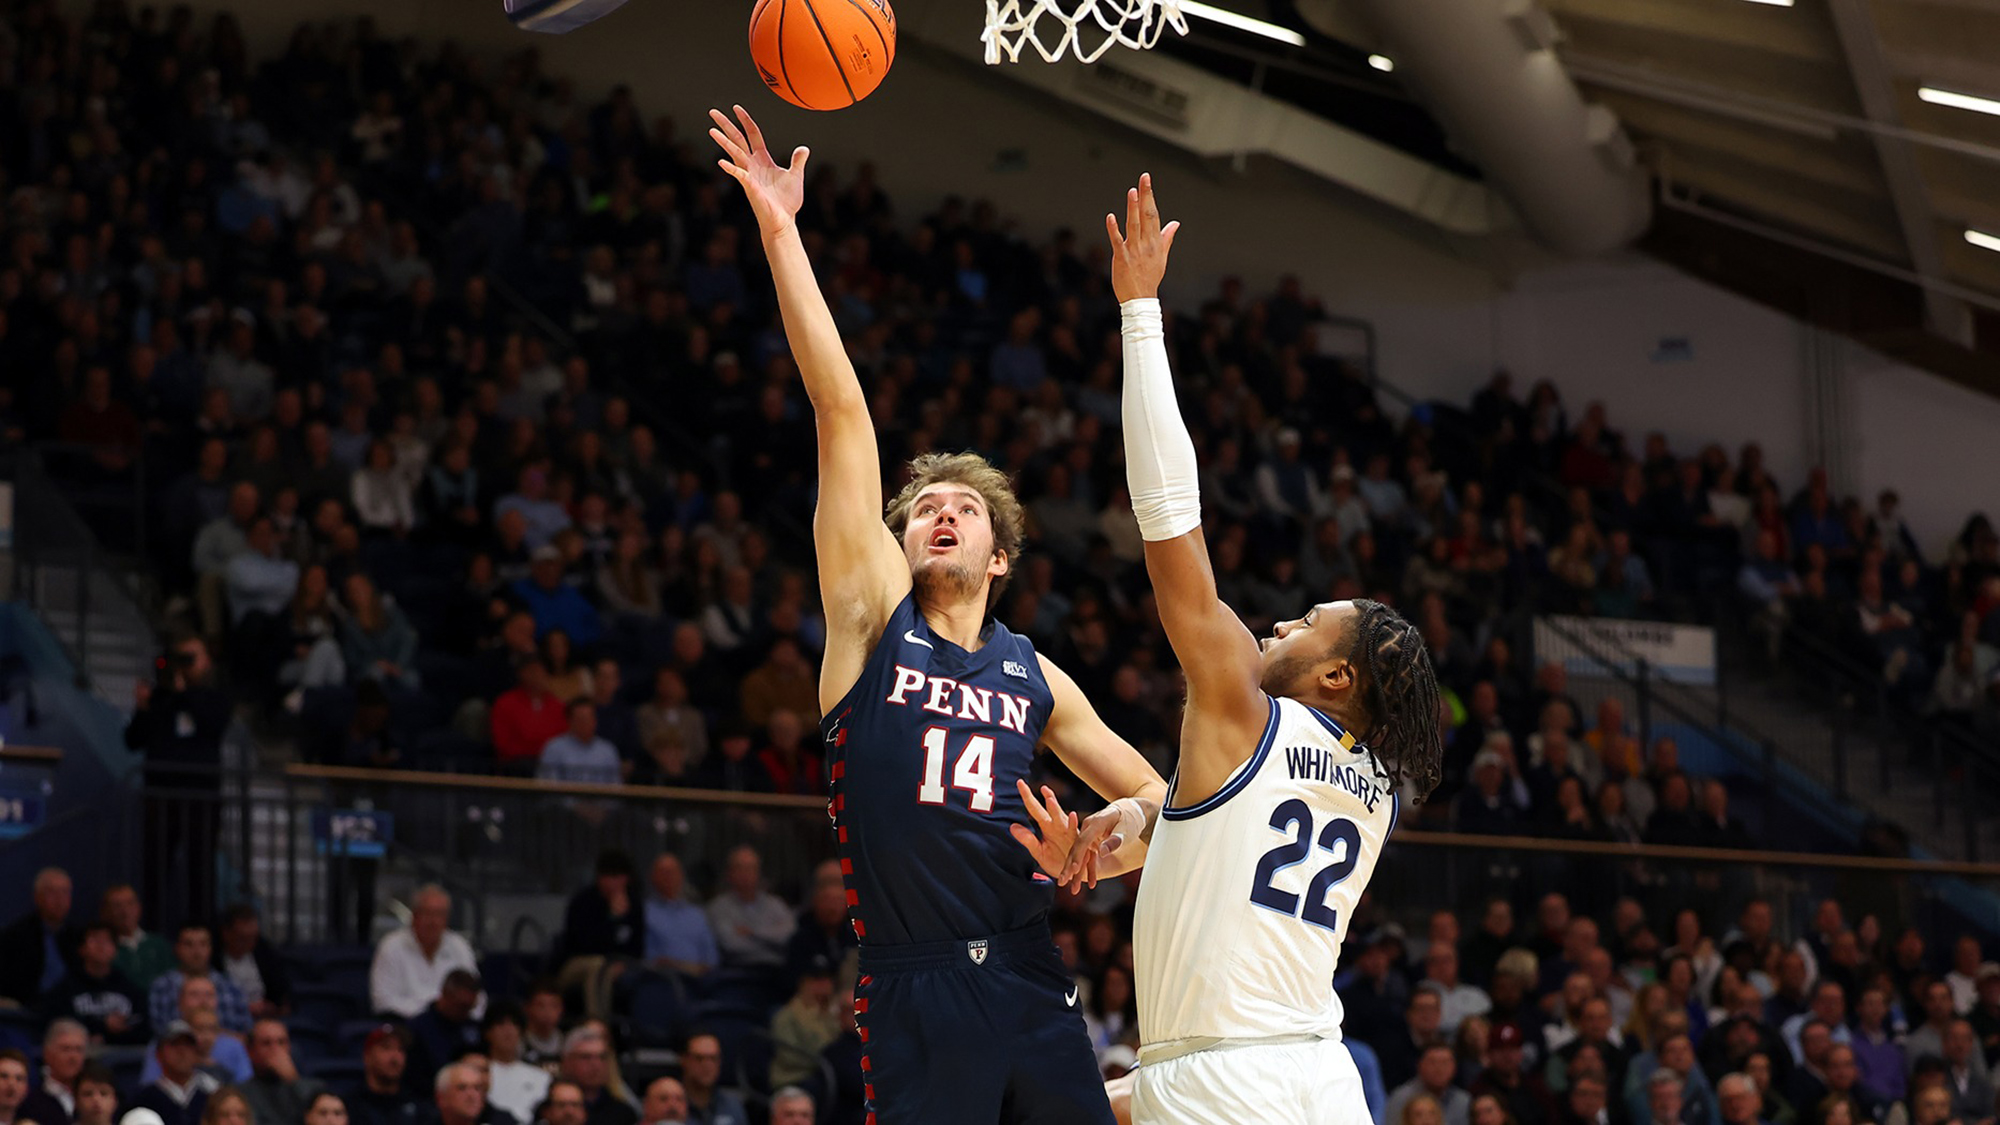 Max Martz goes up for the layup while a Villanova defender attempts to block the shots.